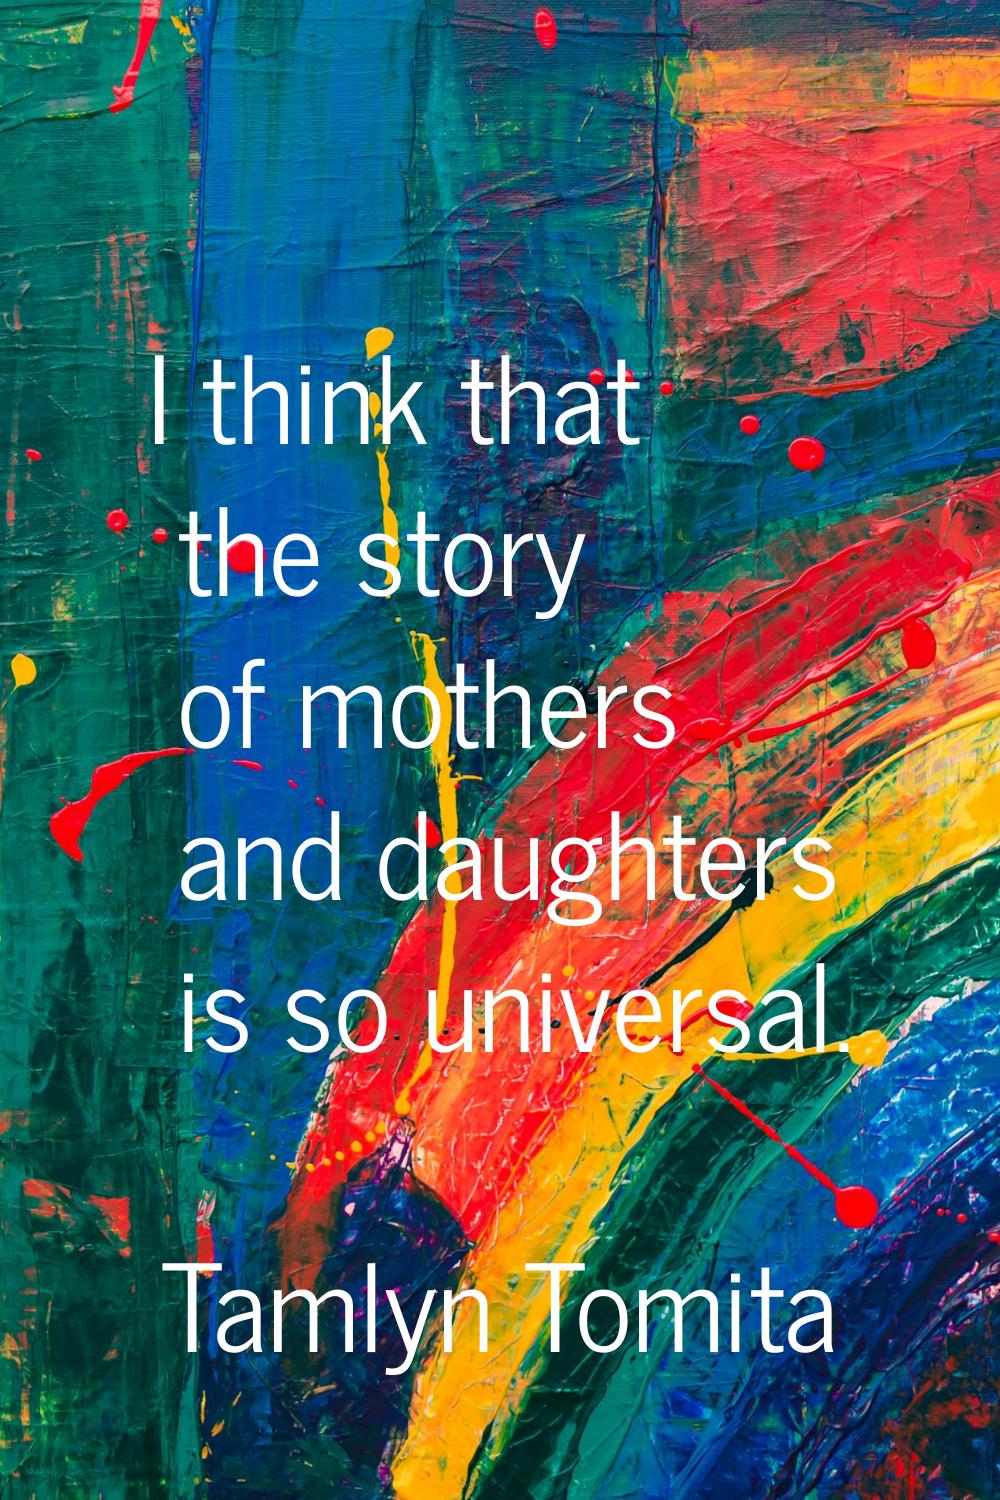 I think that the story of mothers and daughters is so universal.